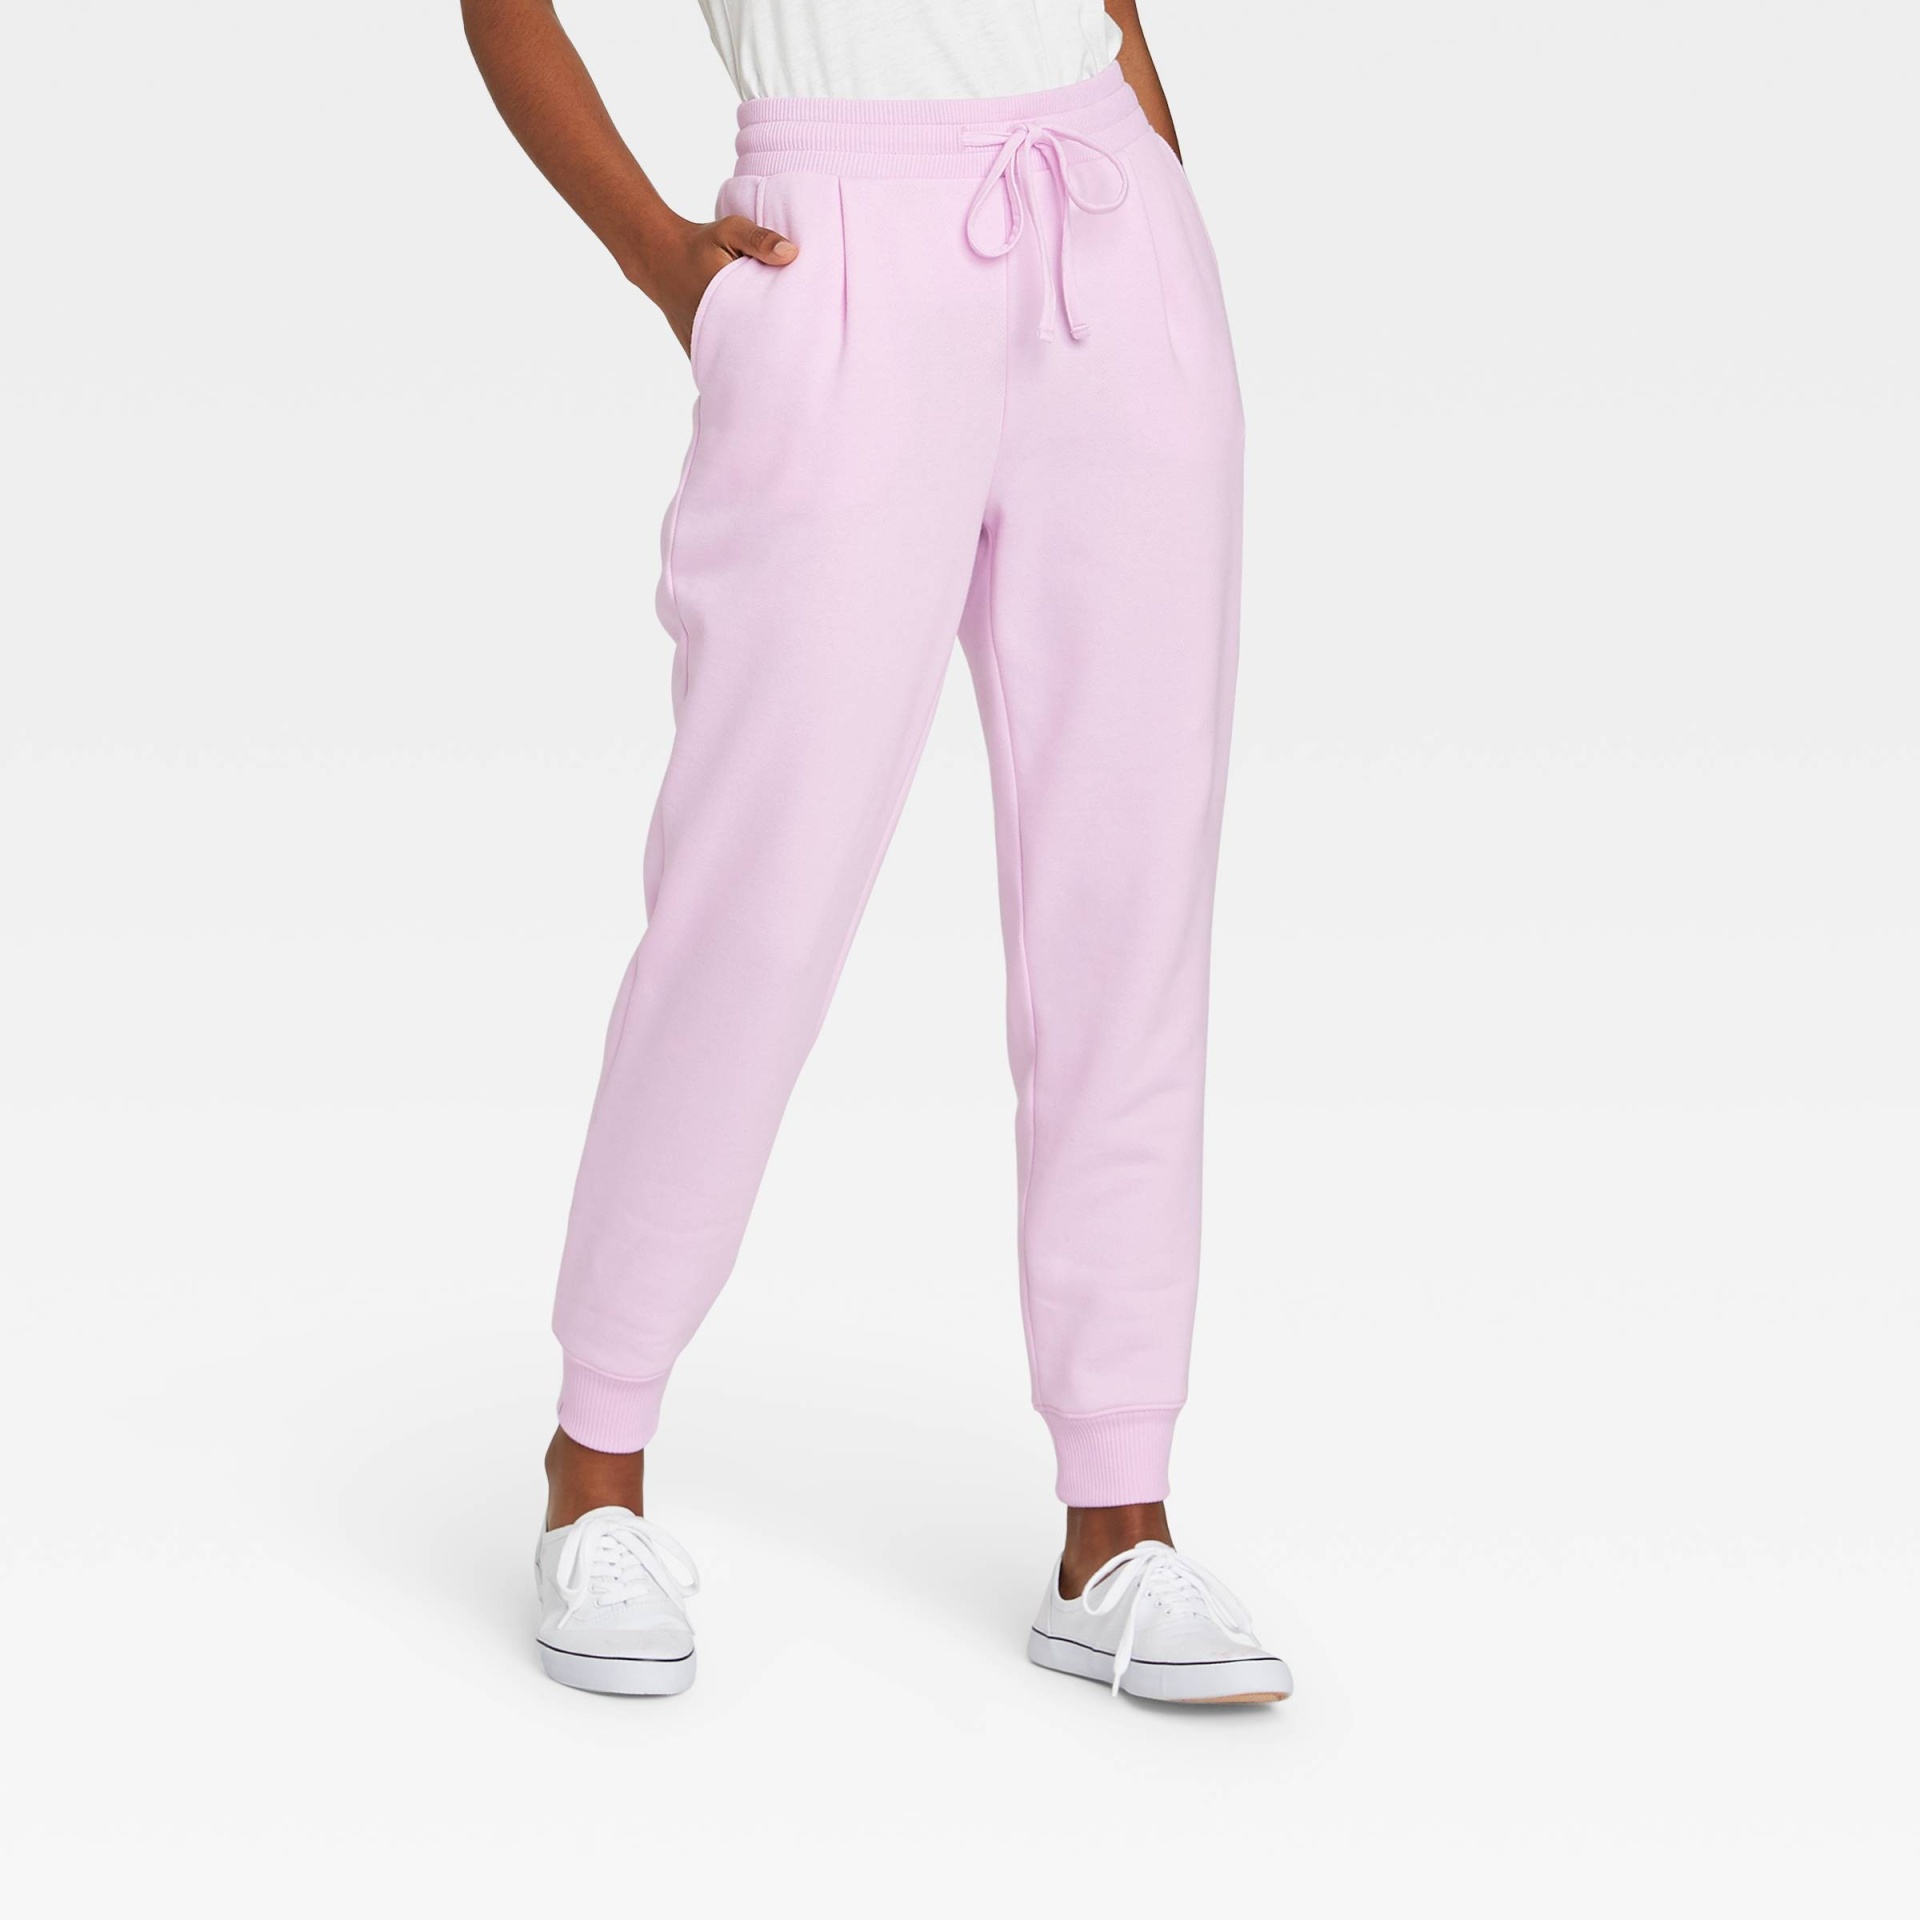 Women's High-Rise Ankle Jogger Pants - A New Day Light Pink XL 1